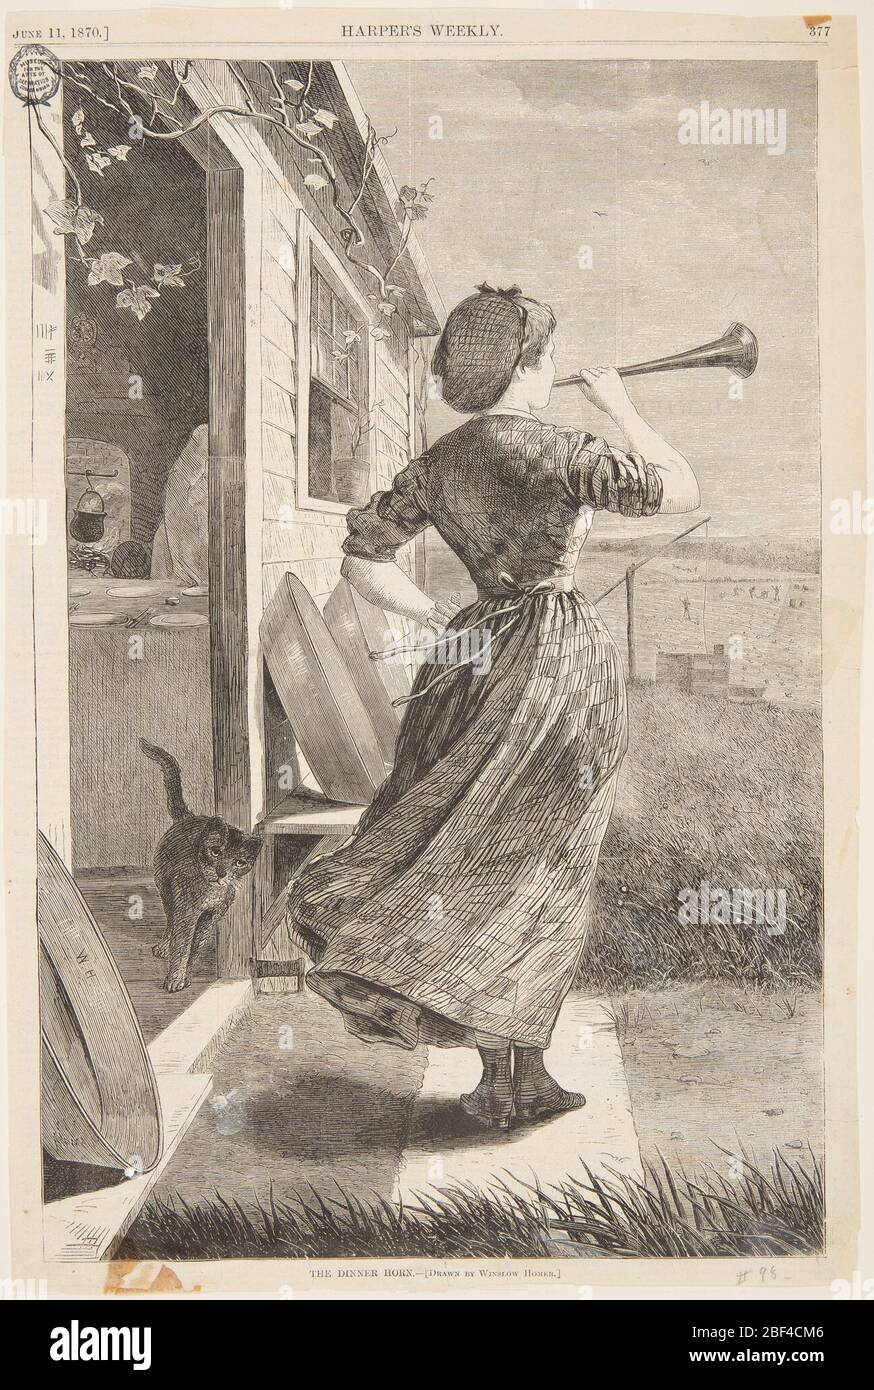 The Dinner Horn. Vertical view at left of the corner of a house with an open door showing portion of interior where a table is laid for a meal, at center of a woman with her back turned blowing trumpet, and in the distance beyond a well with sweep and a field with workers. Stock Photo